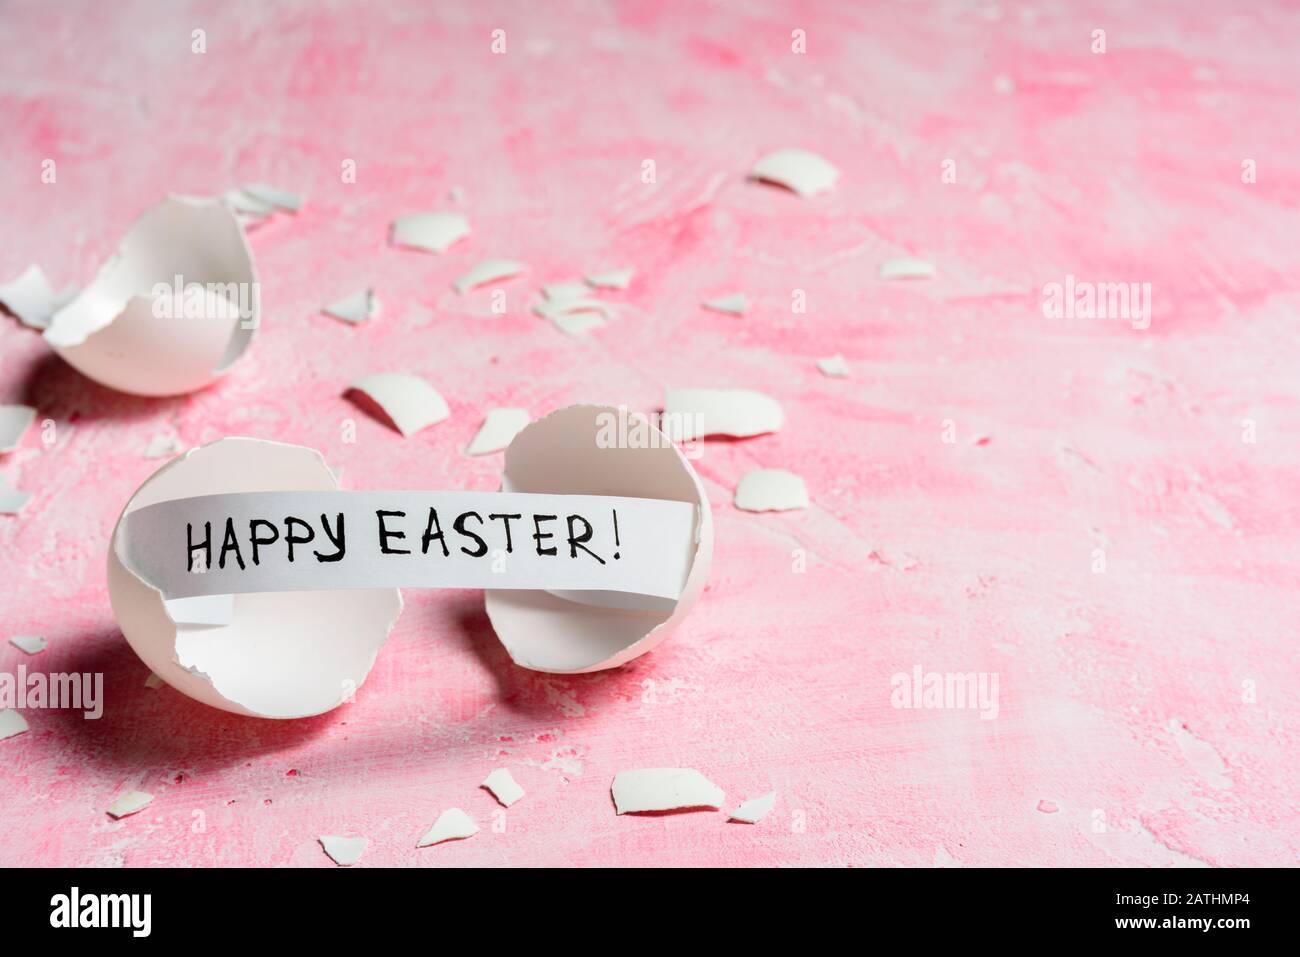 Cracked egg with text HAPPY EASTER on pink background. Copy space Stock Photo